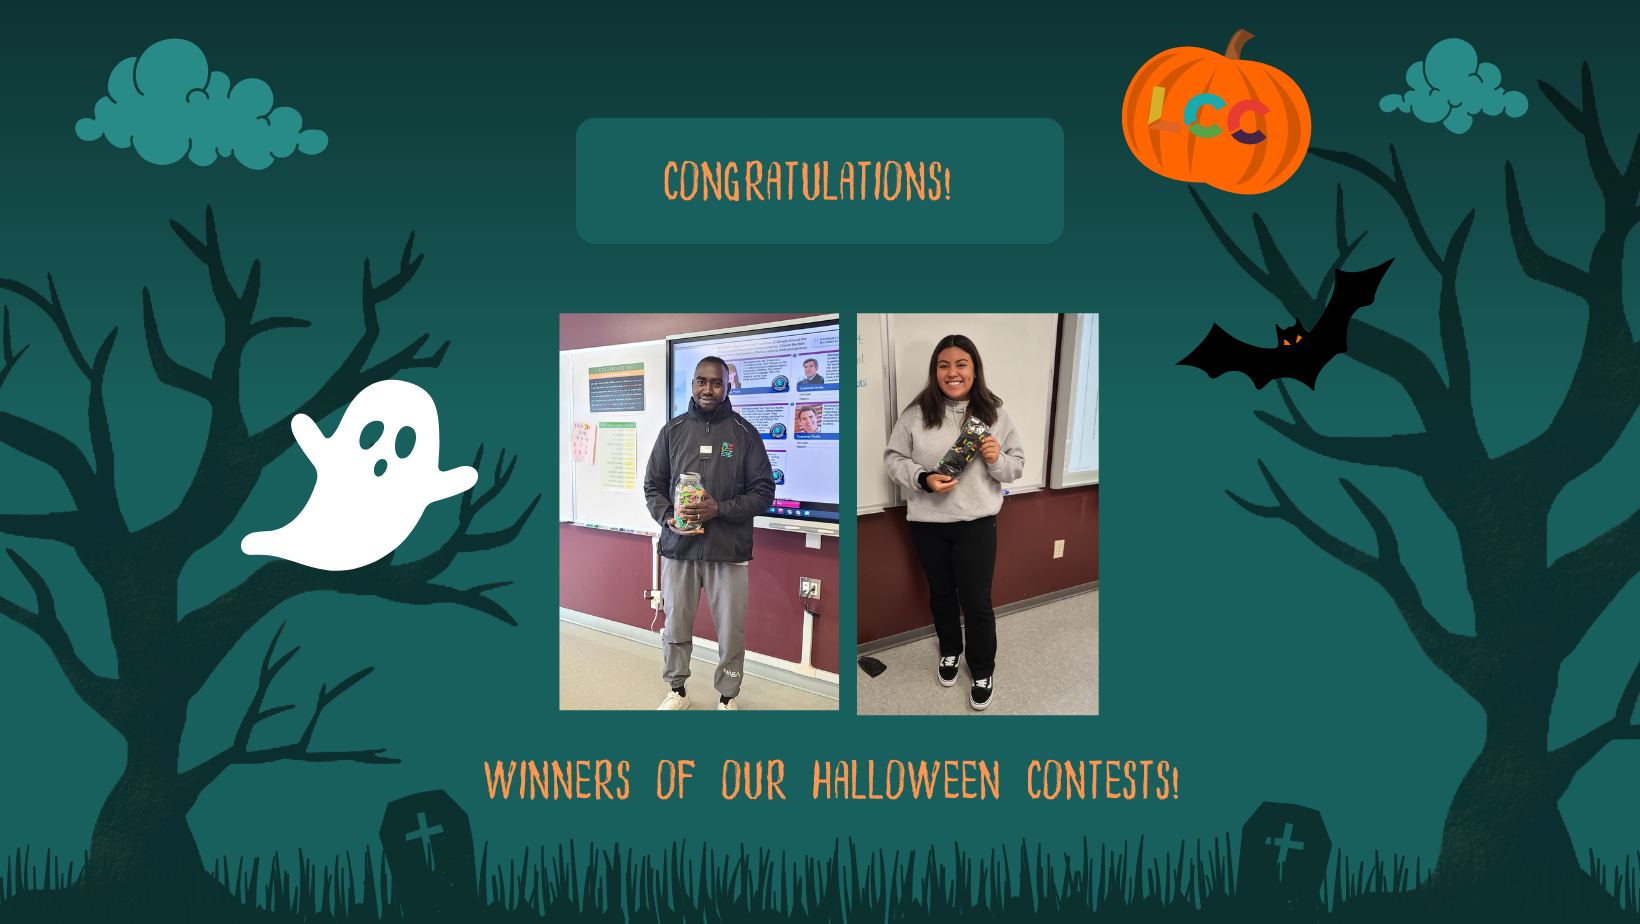 Winners of our Halloween contests!